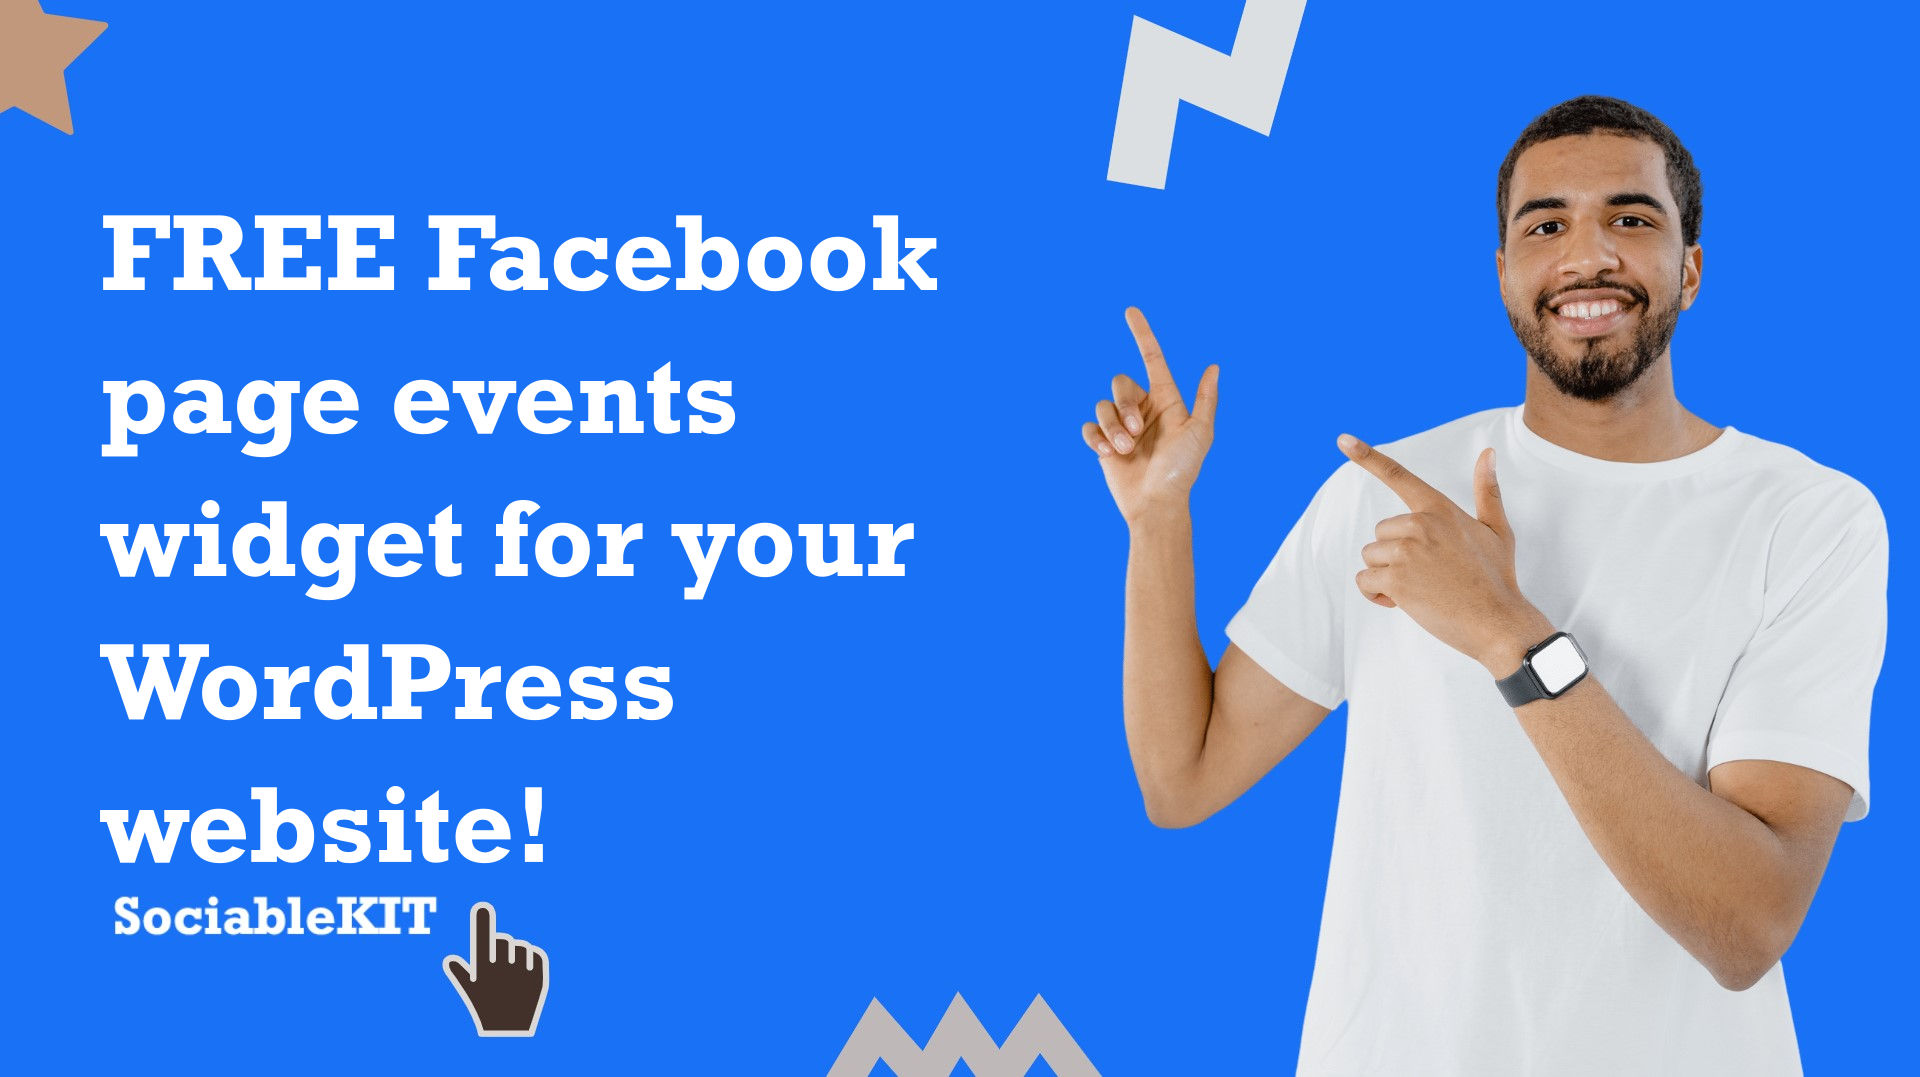 Free Facebook page events widget for your WordPress website